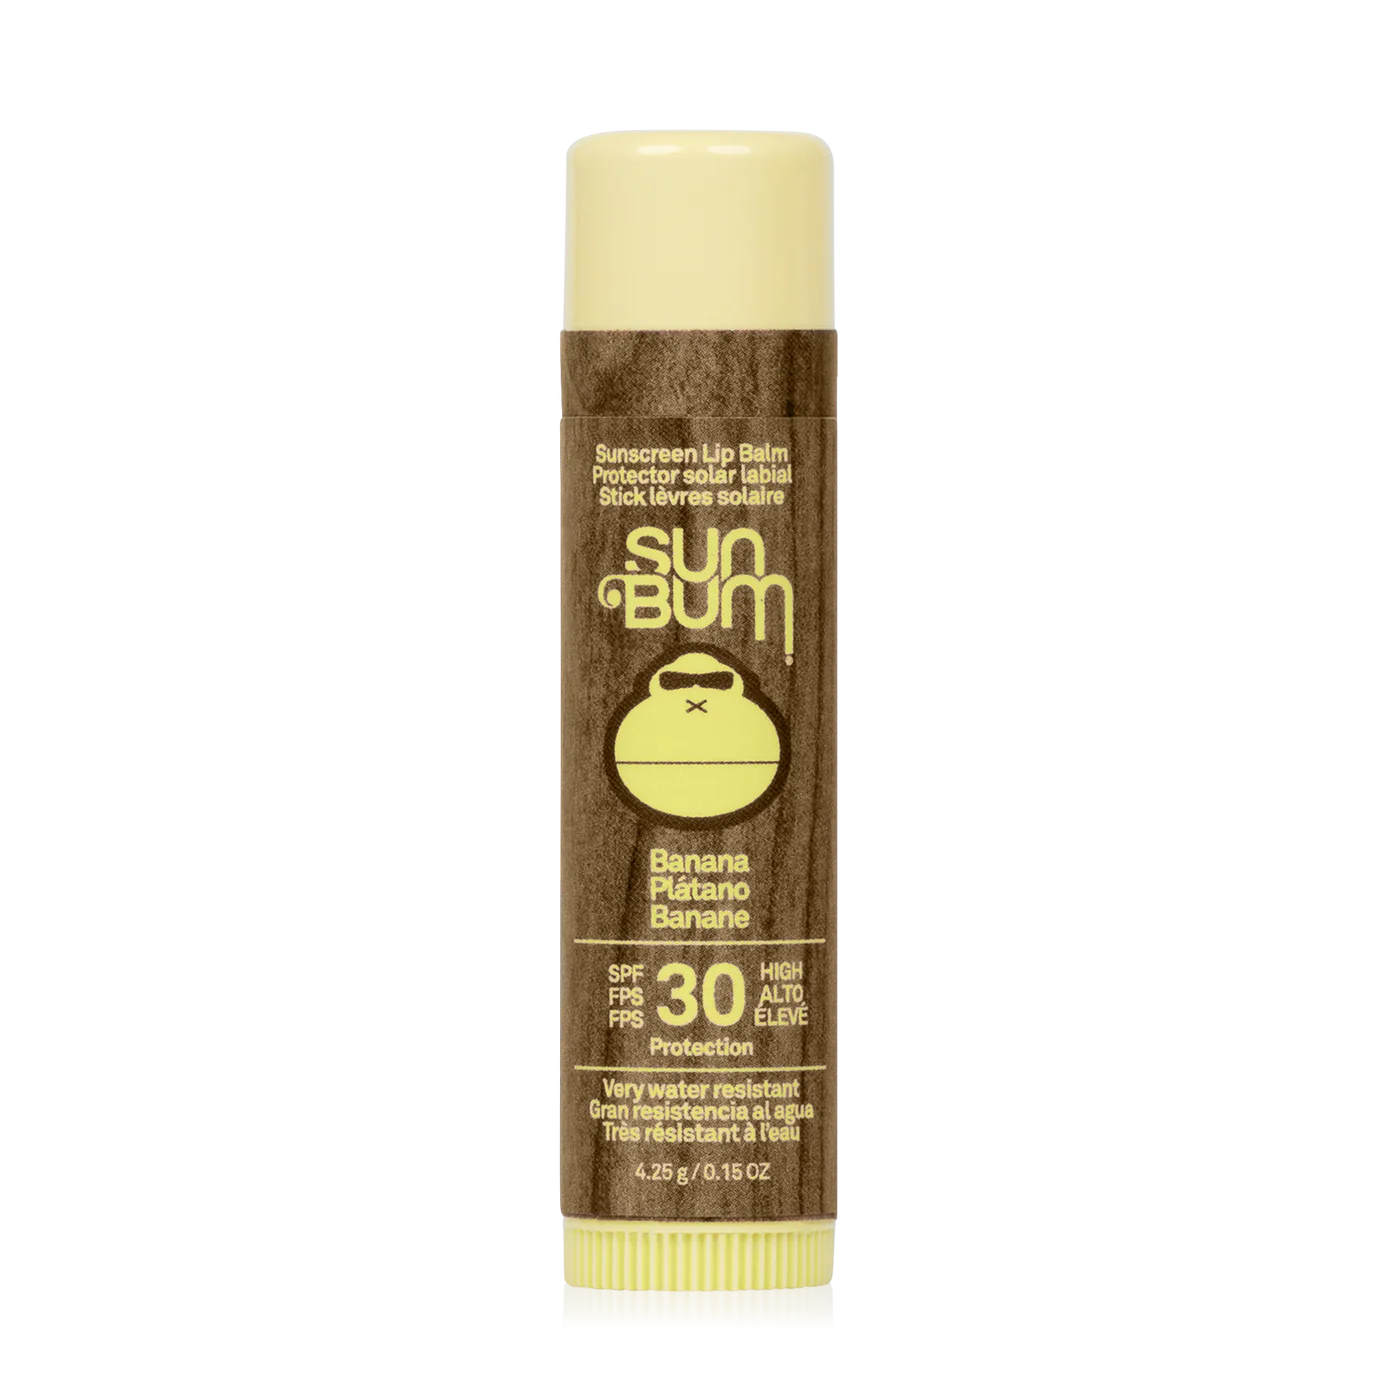 Lip balm container with a yellow top and bottom, wood grain centre, along with the sun bum wordmark and mascot